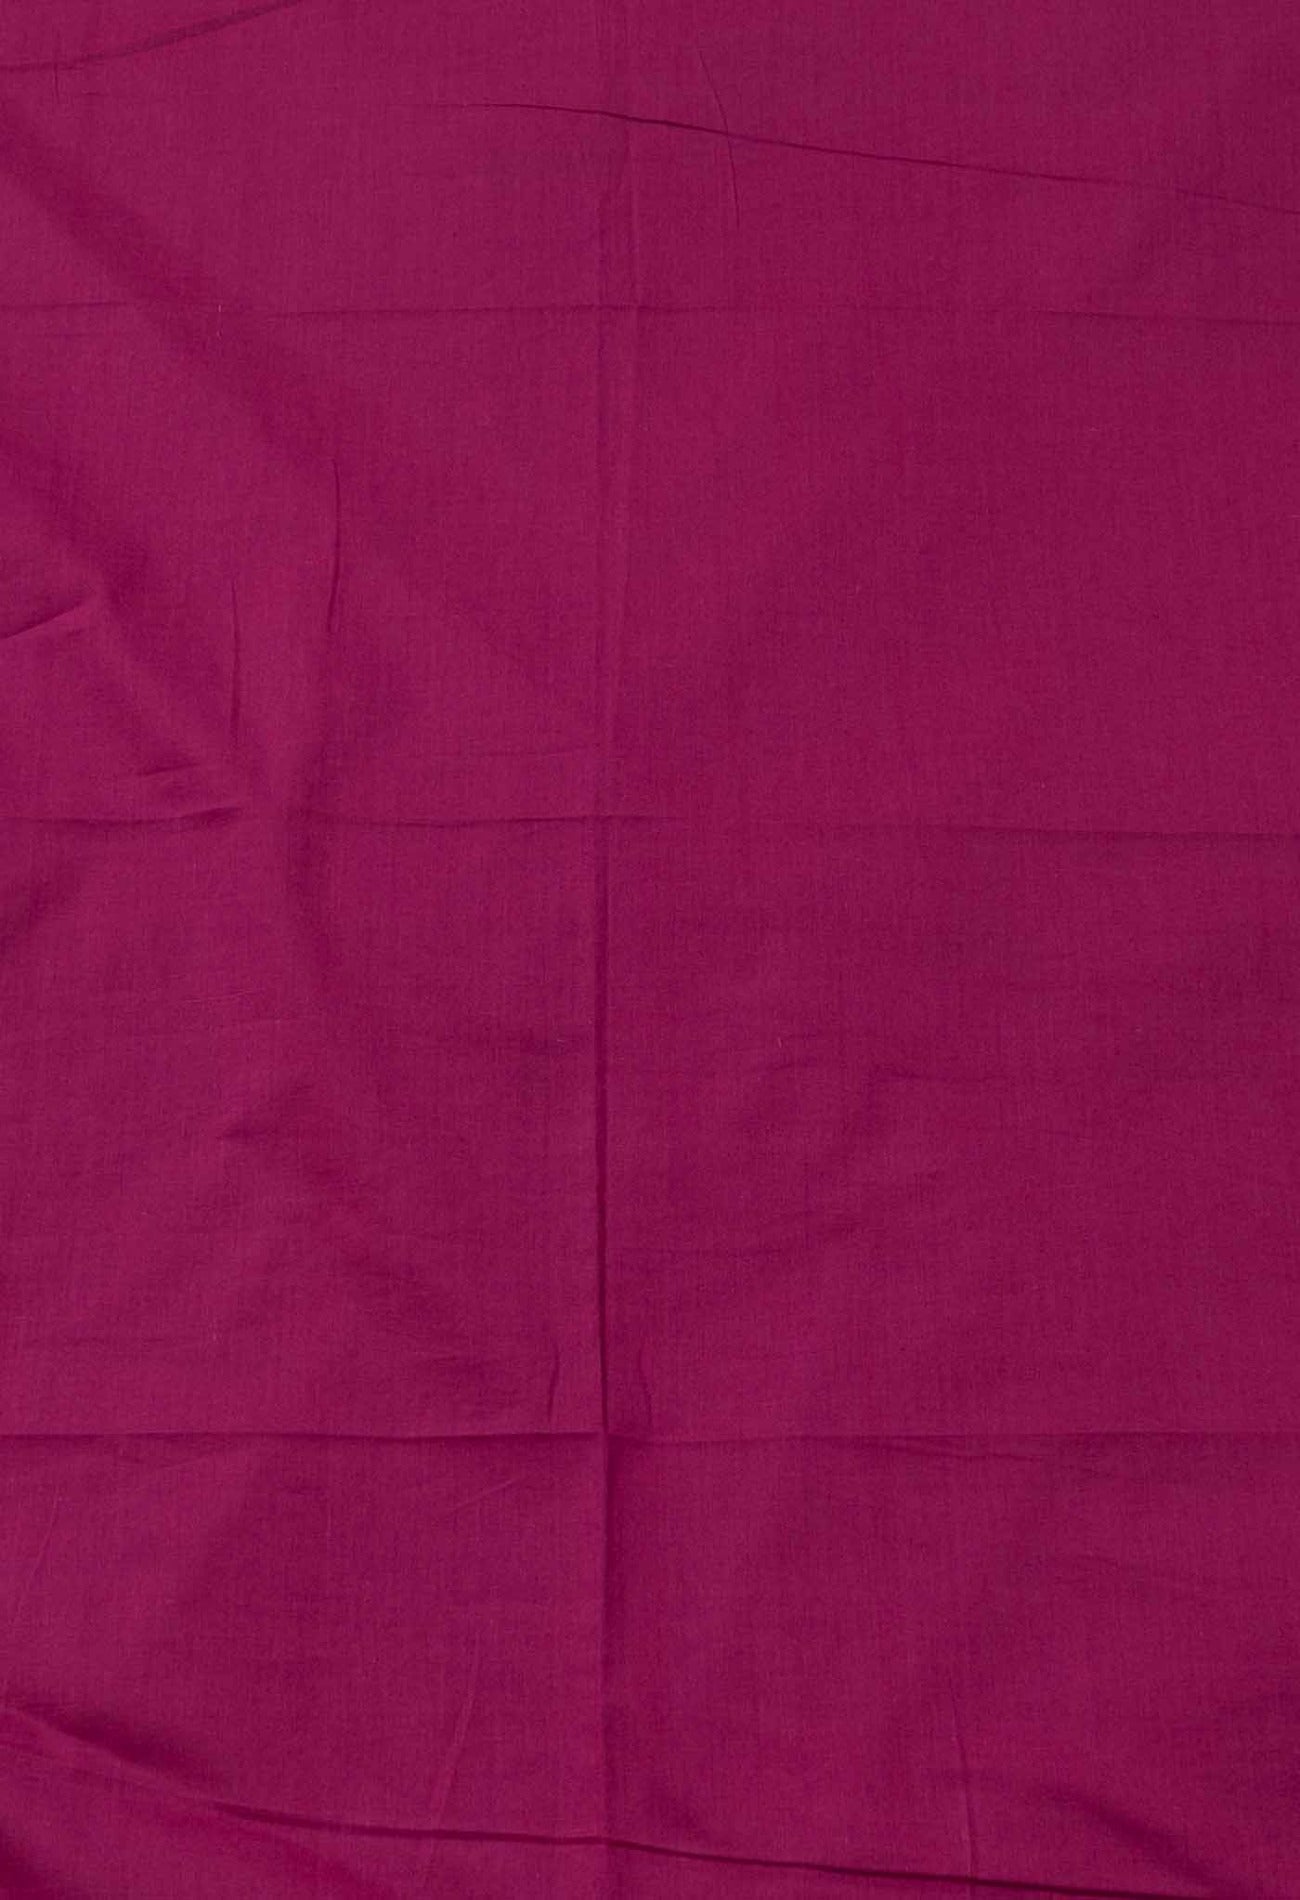 Online Shopping for Purple Pure Bagh venkatagiri Superfine Cotton Saree with Bagh from Andhra Pradesh at Unnatisilks.com India
